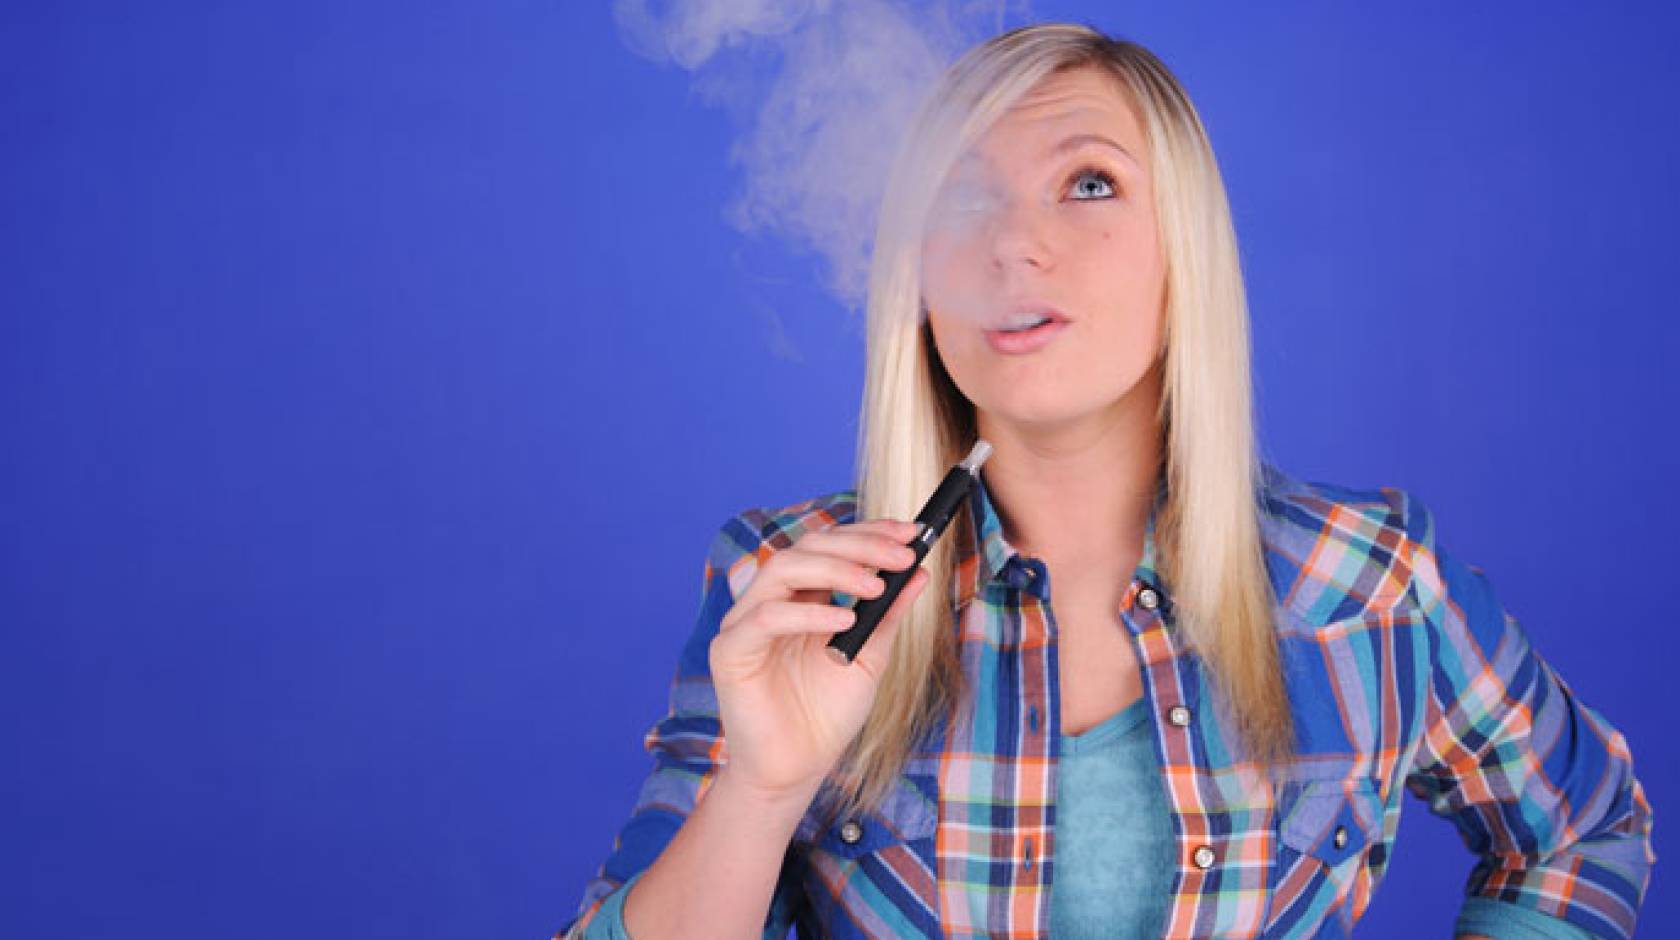 Vapers beware: 10 things to know about e-cigarettes teen vaping image